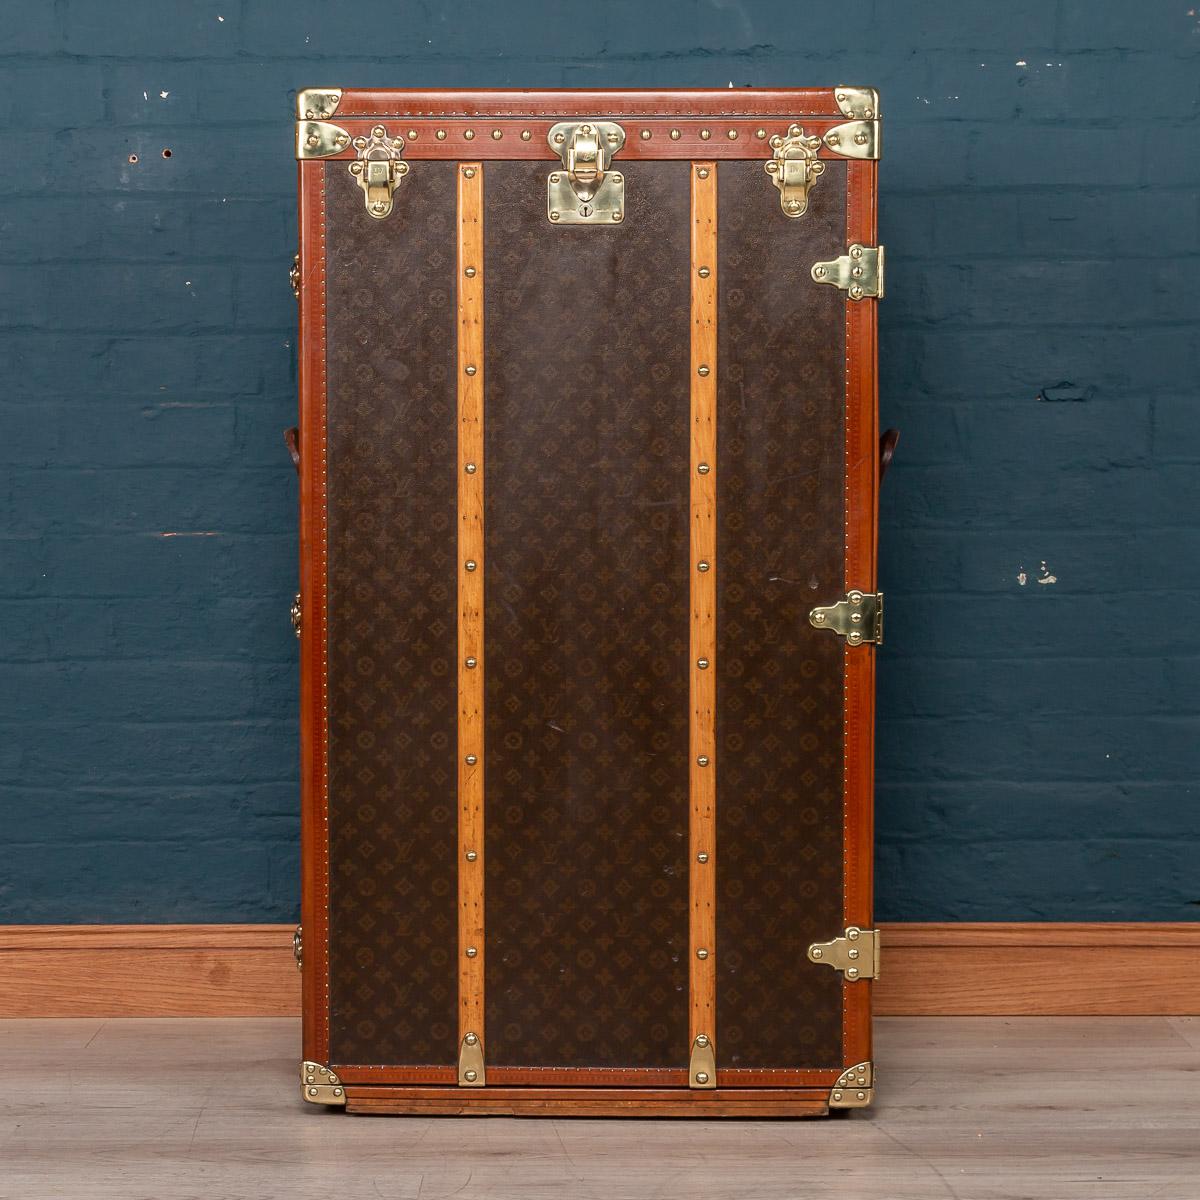 An extremely rare and unusual Louis Vuitton wardrobe trunk, made in France, circa 1950s-1960s. What differentiates this trunk from many of the other wardrobe trunk is the majestic proportions and the opening mechanism allowing the user to access the